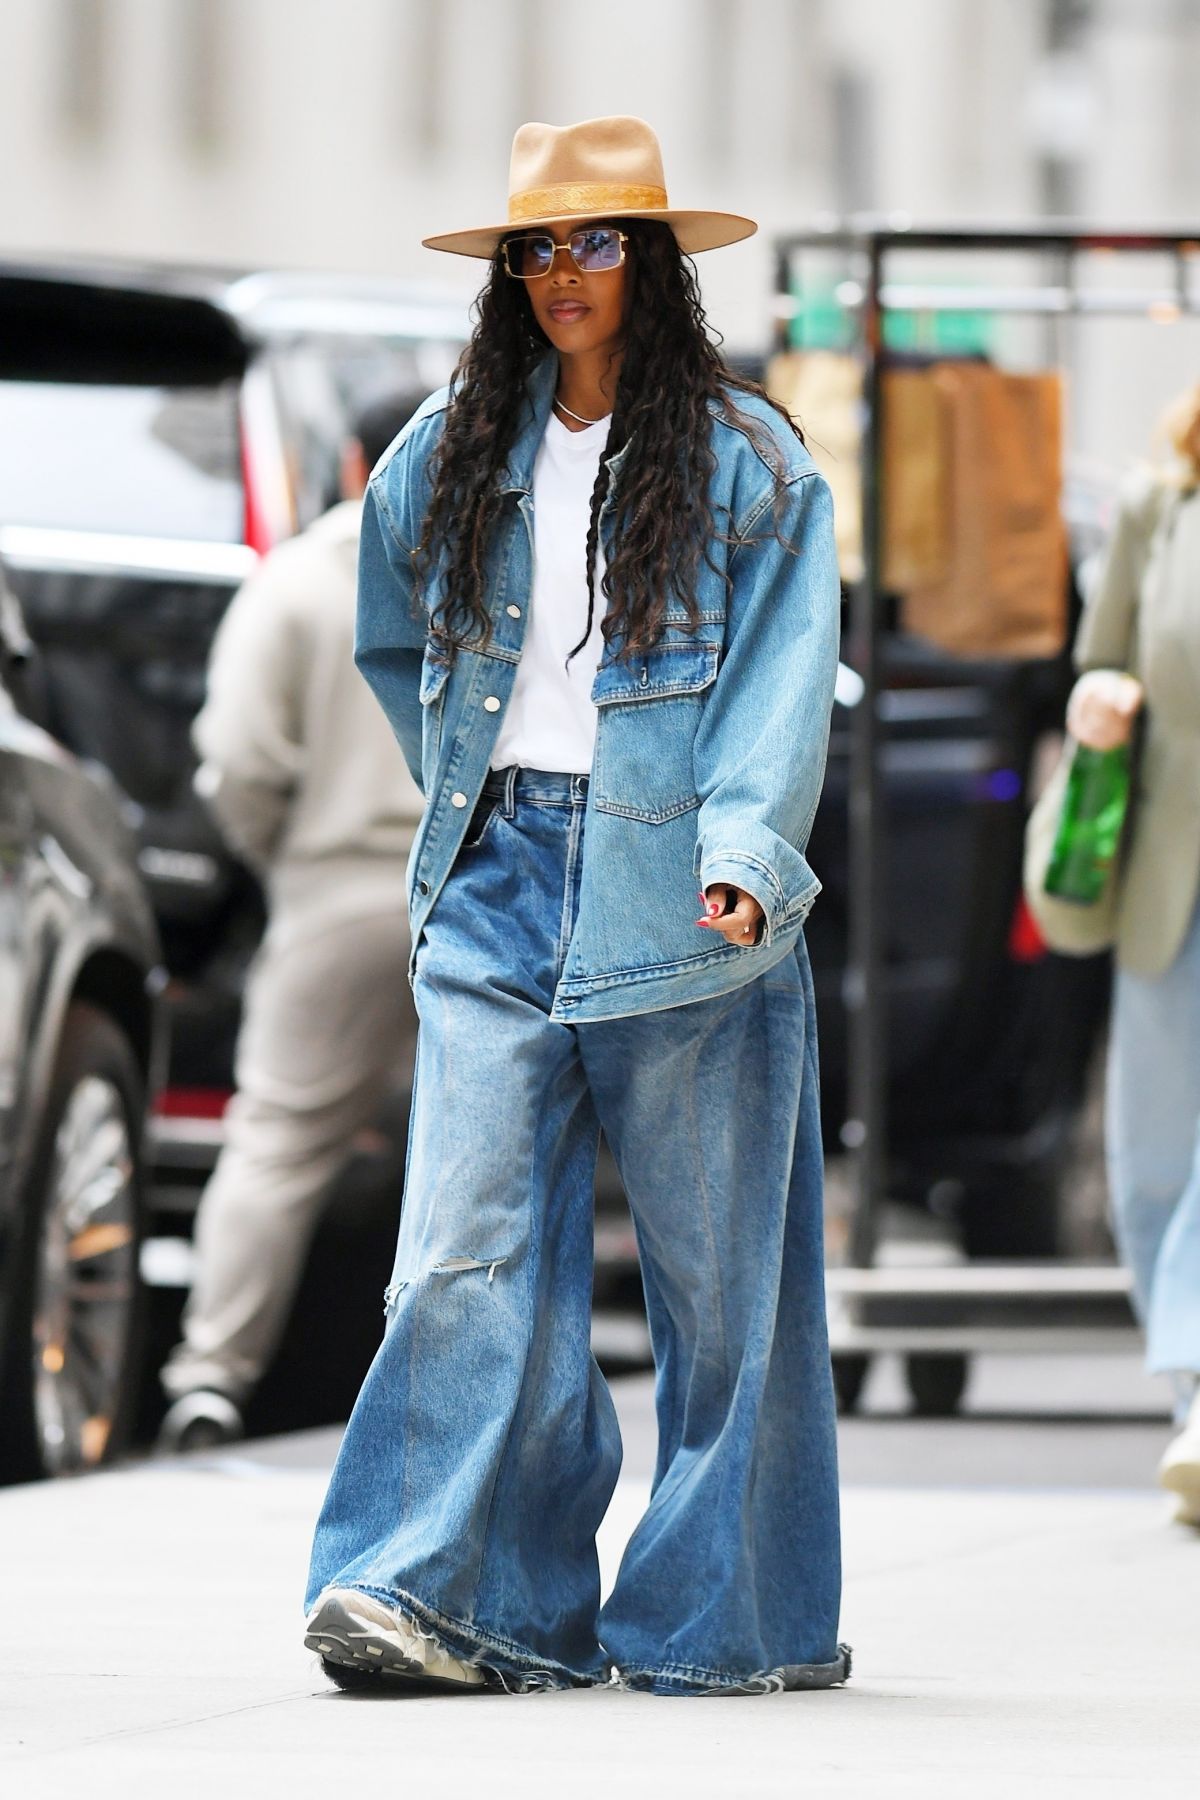 2023 is making denim famous once again. But how to style it?